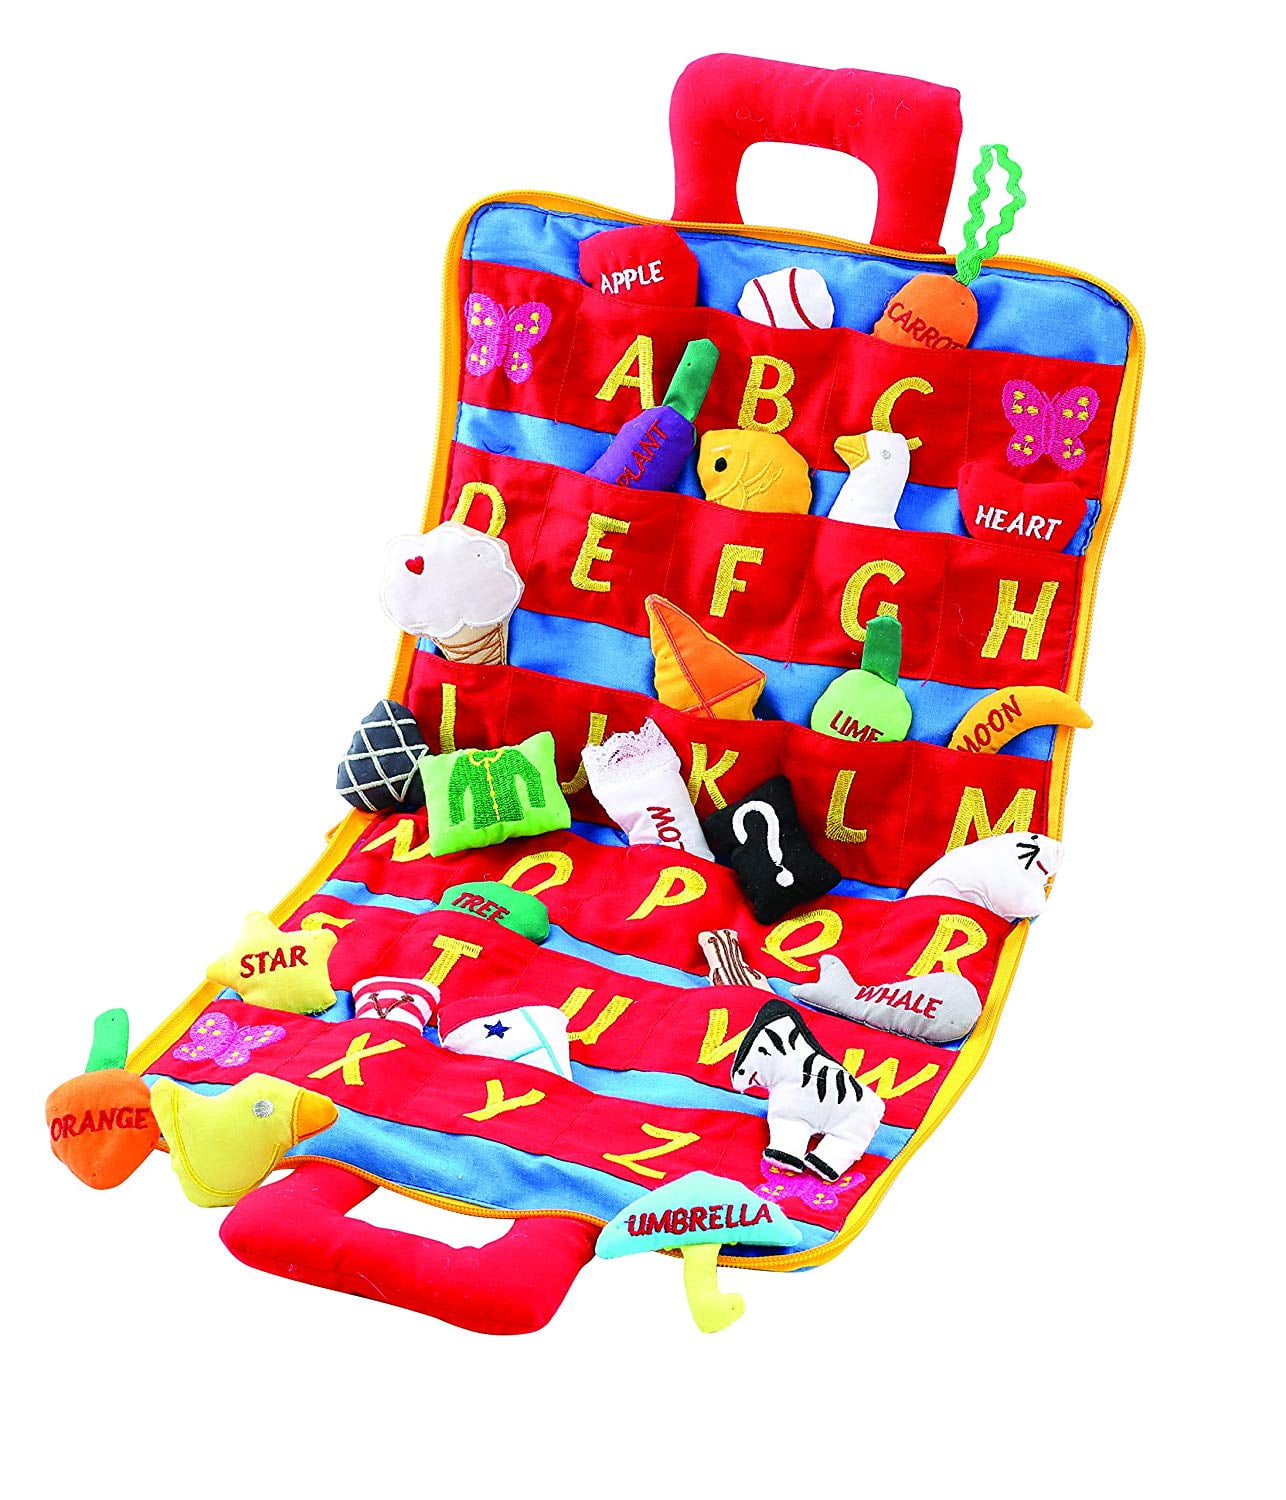 ABC Carry Bag Set with 26 Objects | Groupon